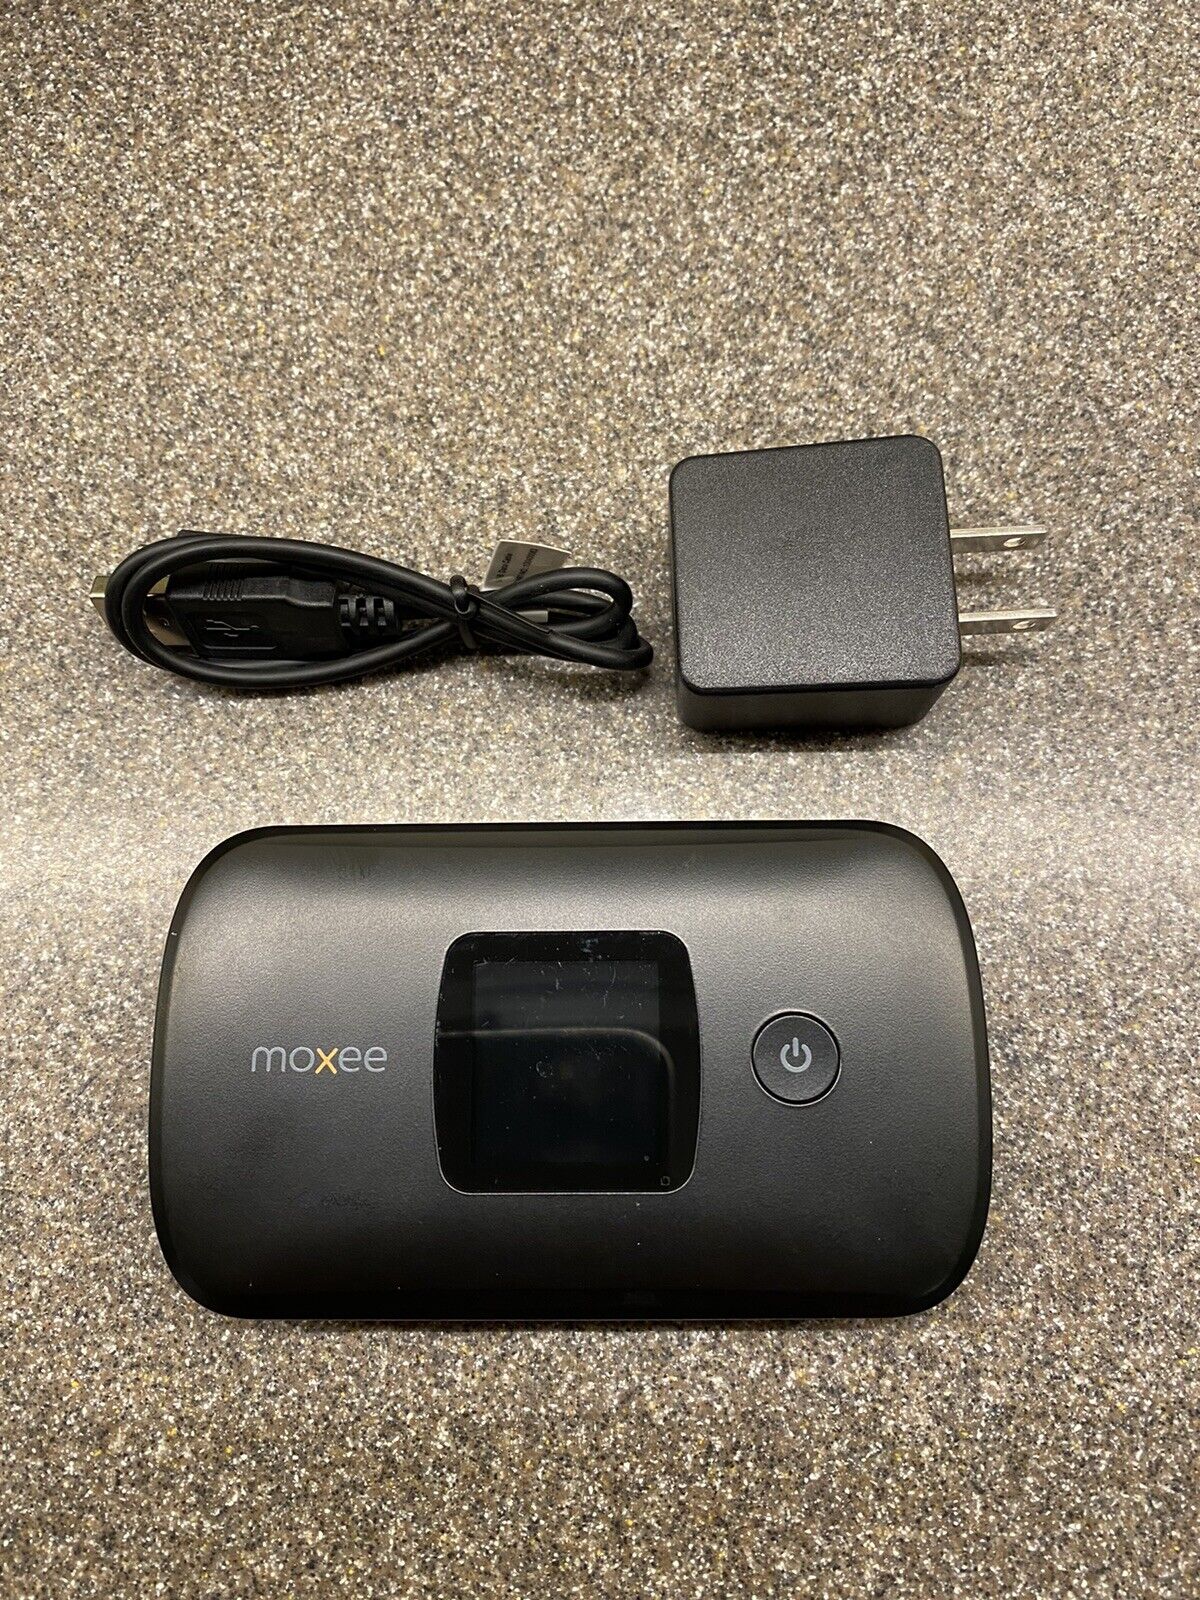 AT&T Moxee Mobile Hotspot - Black - Tested - Working Condition